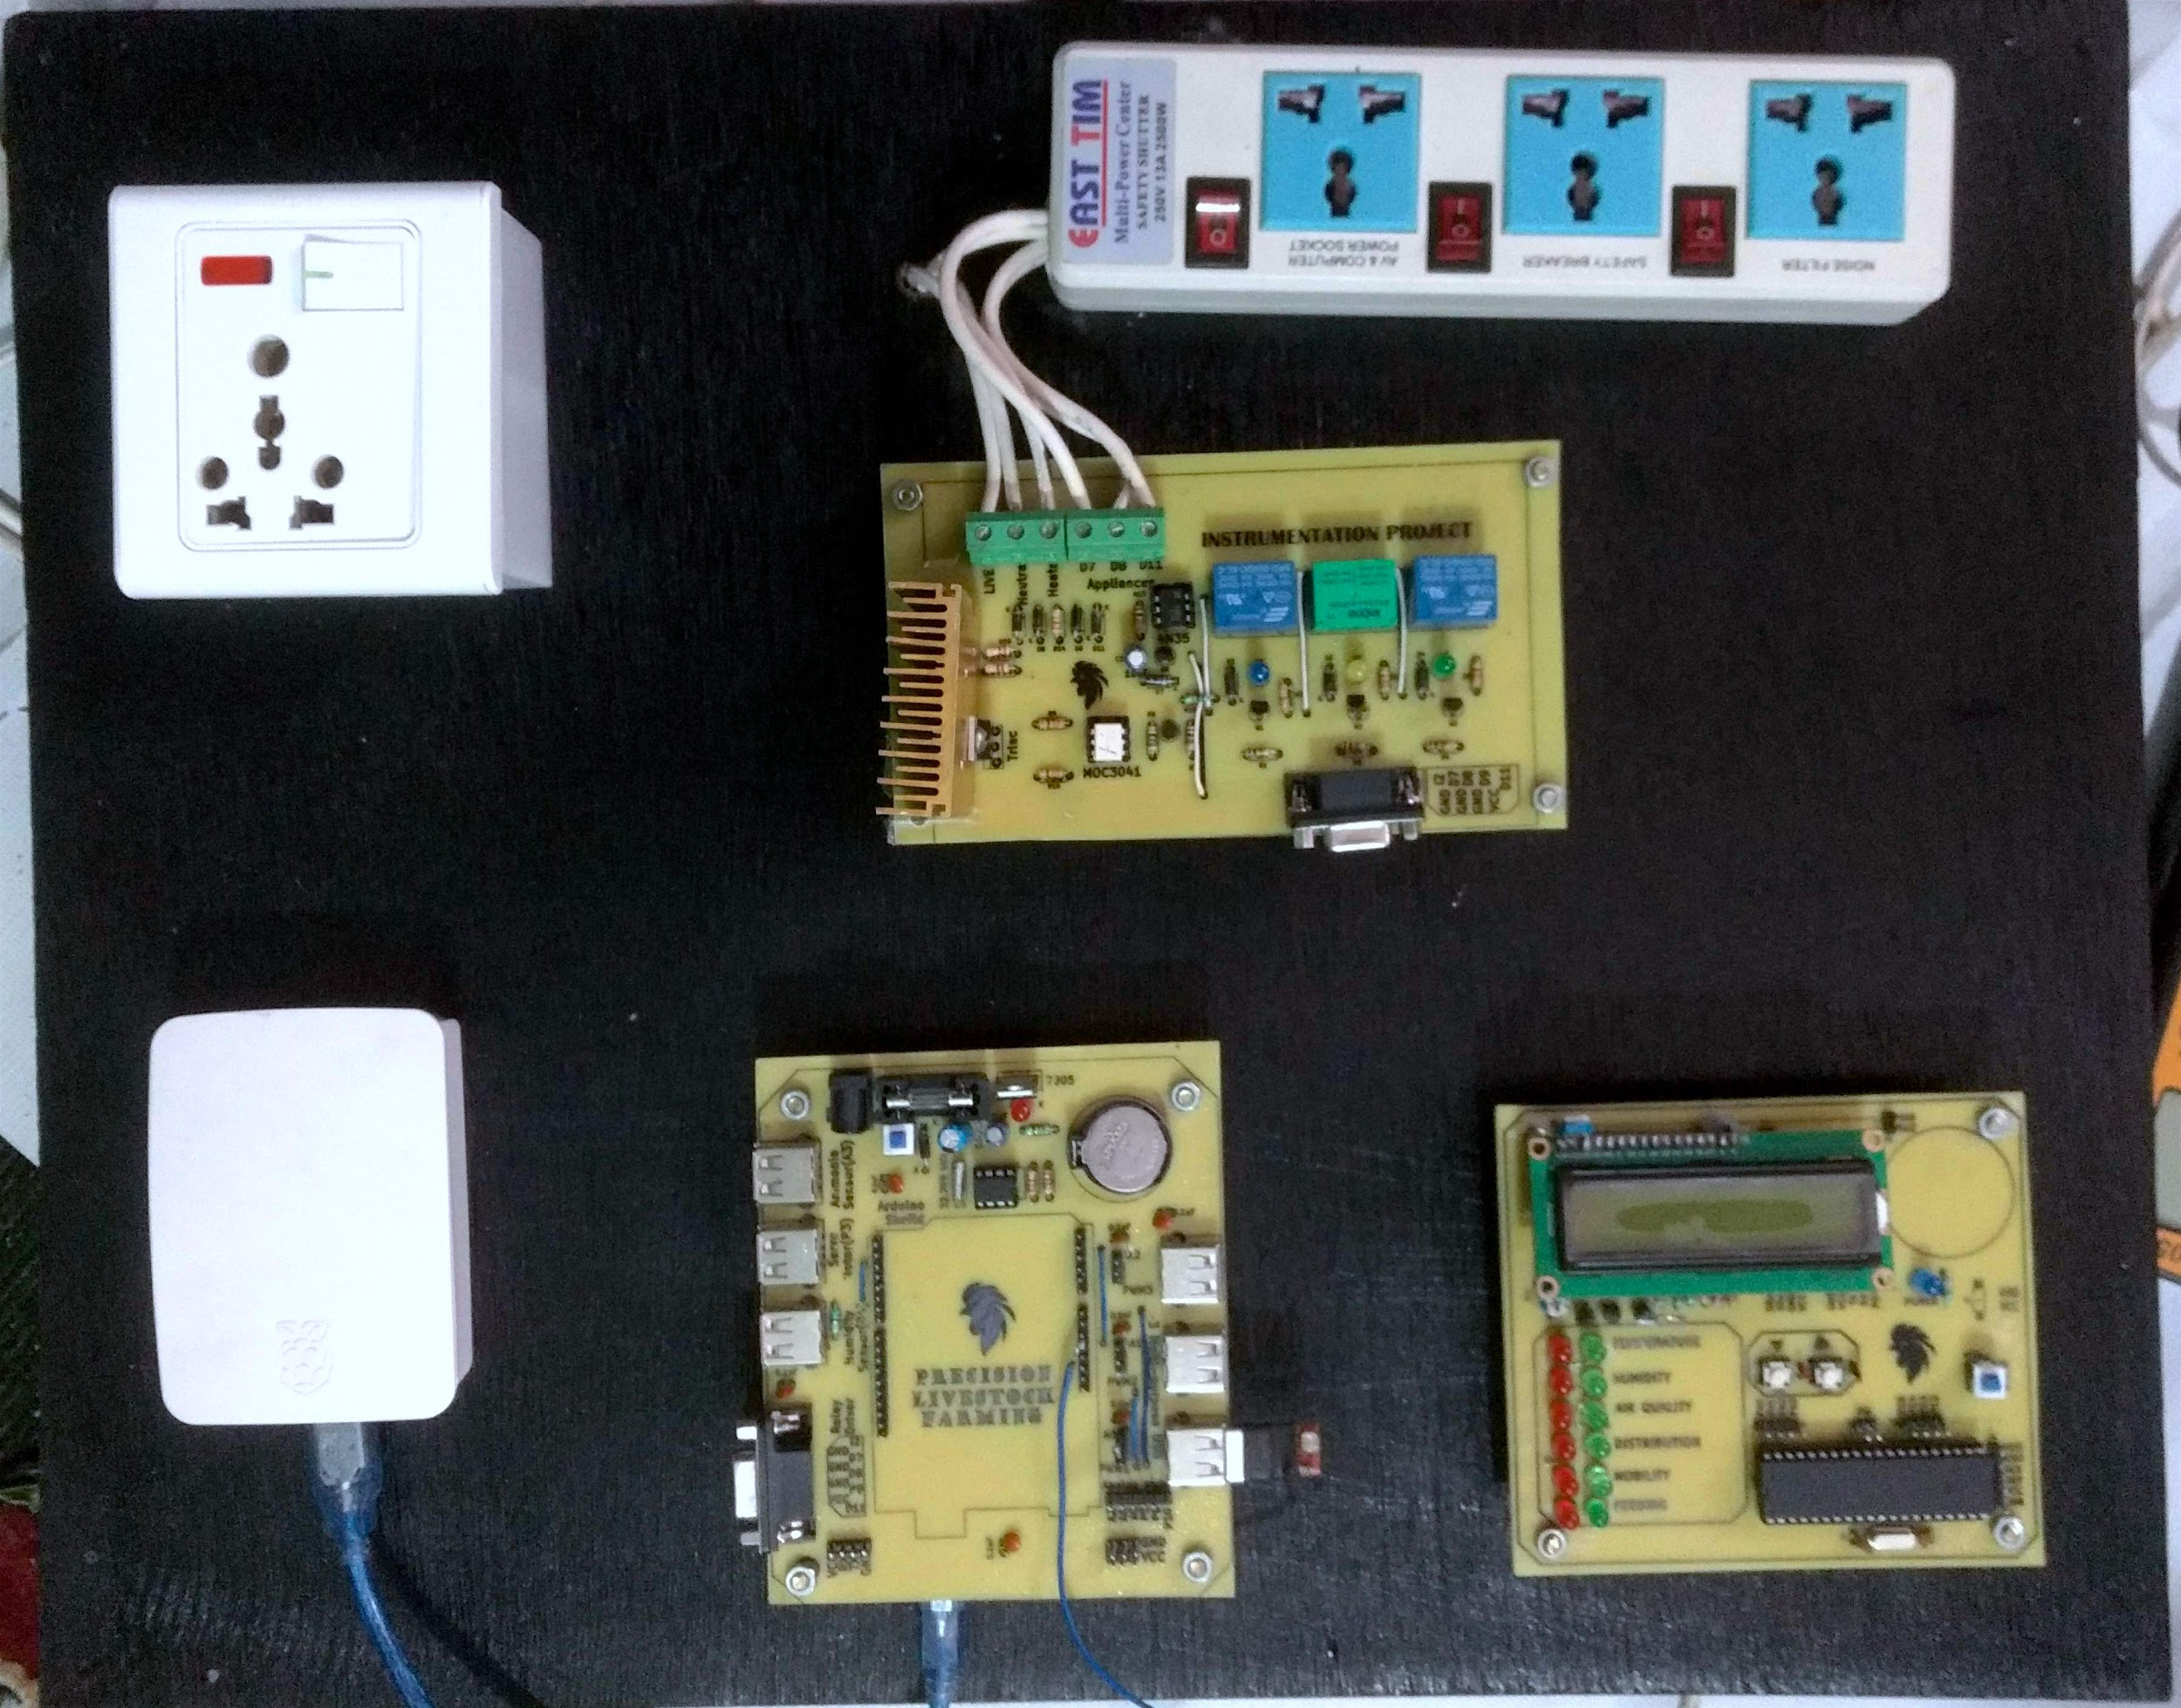 Prototype Circuits for sensor data accumulation and actuations